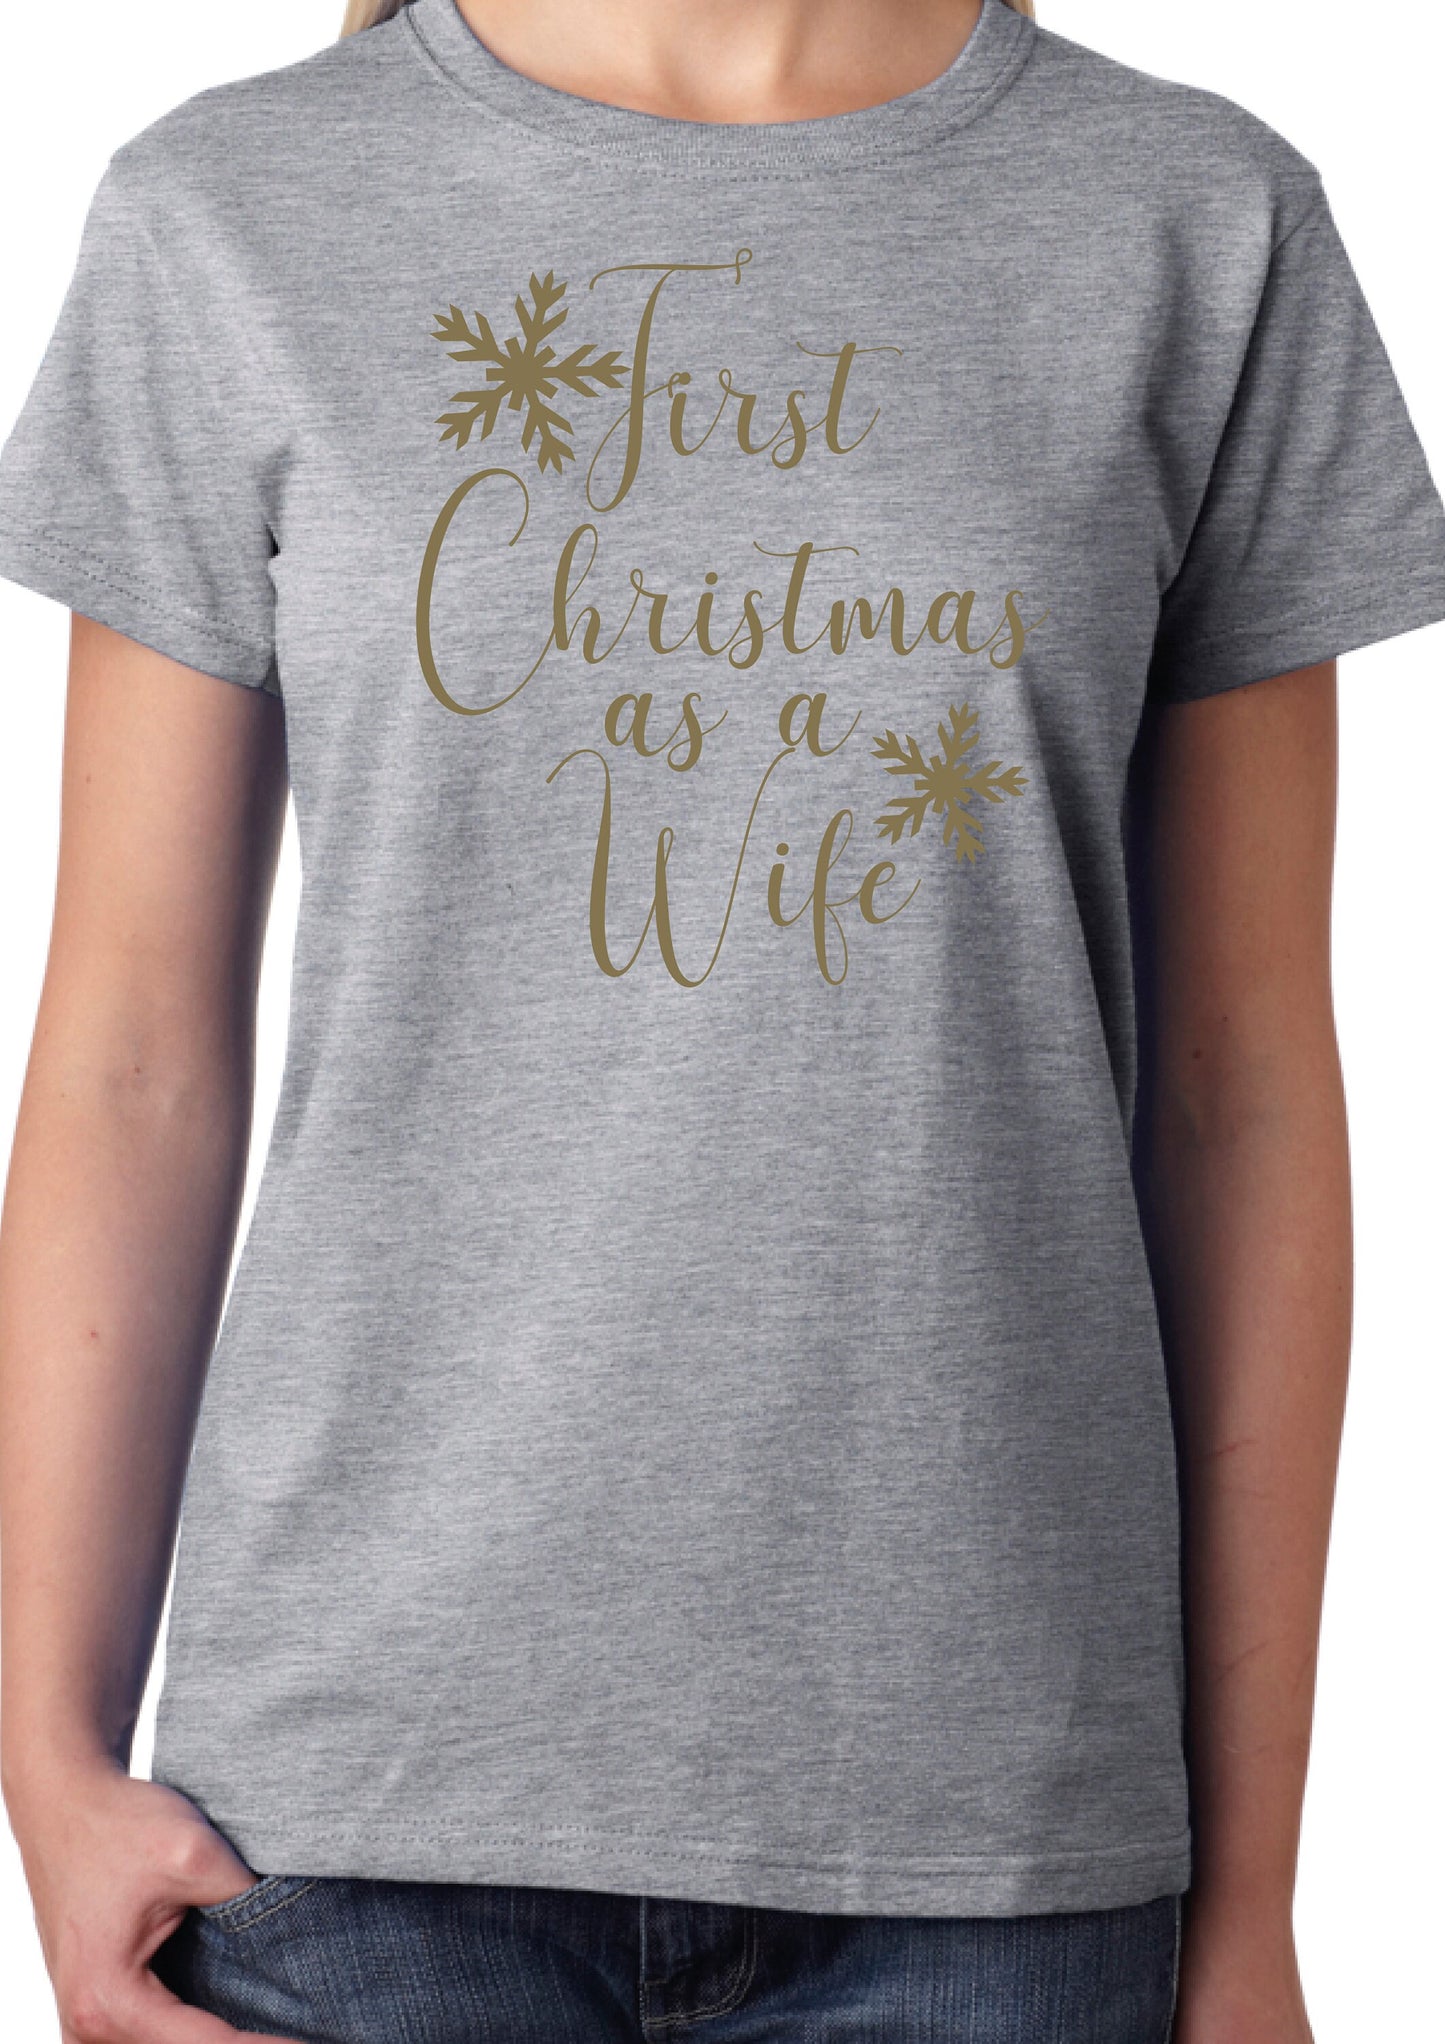 First Christmas as a Wife T-shirt, Funny Xmas Wedding Gift